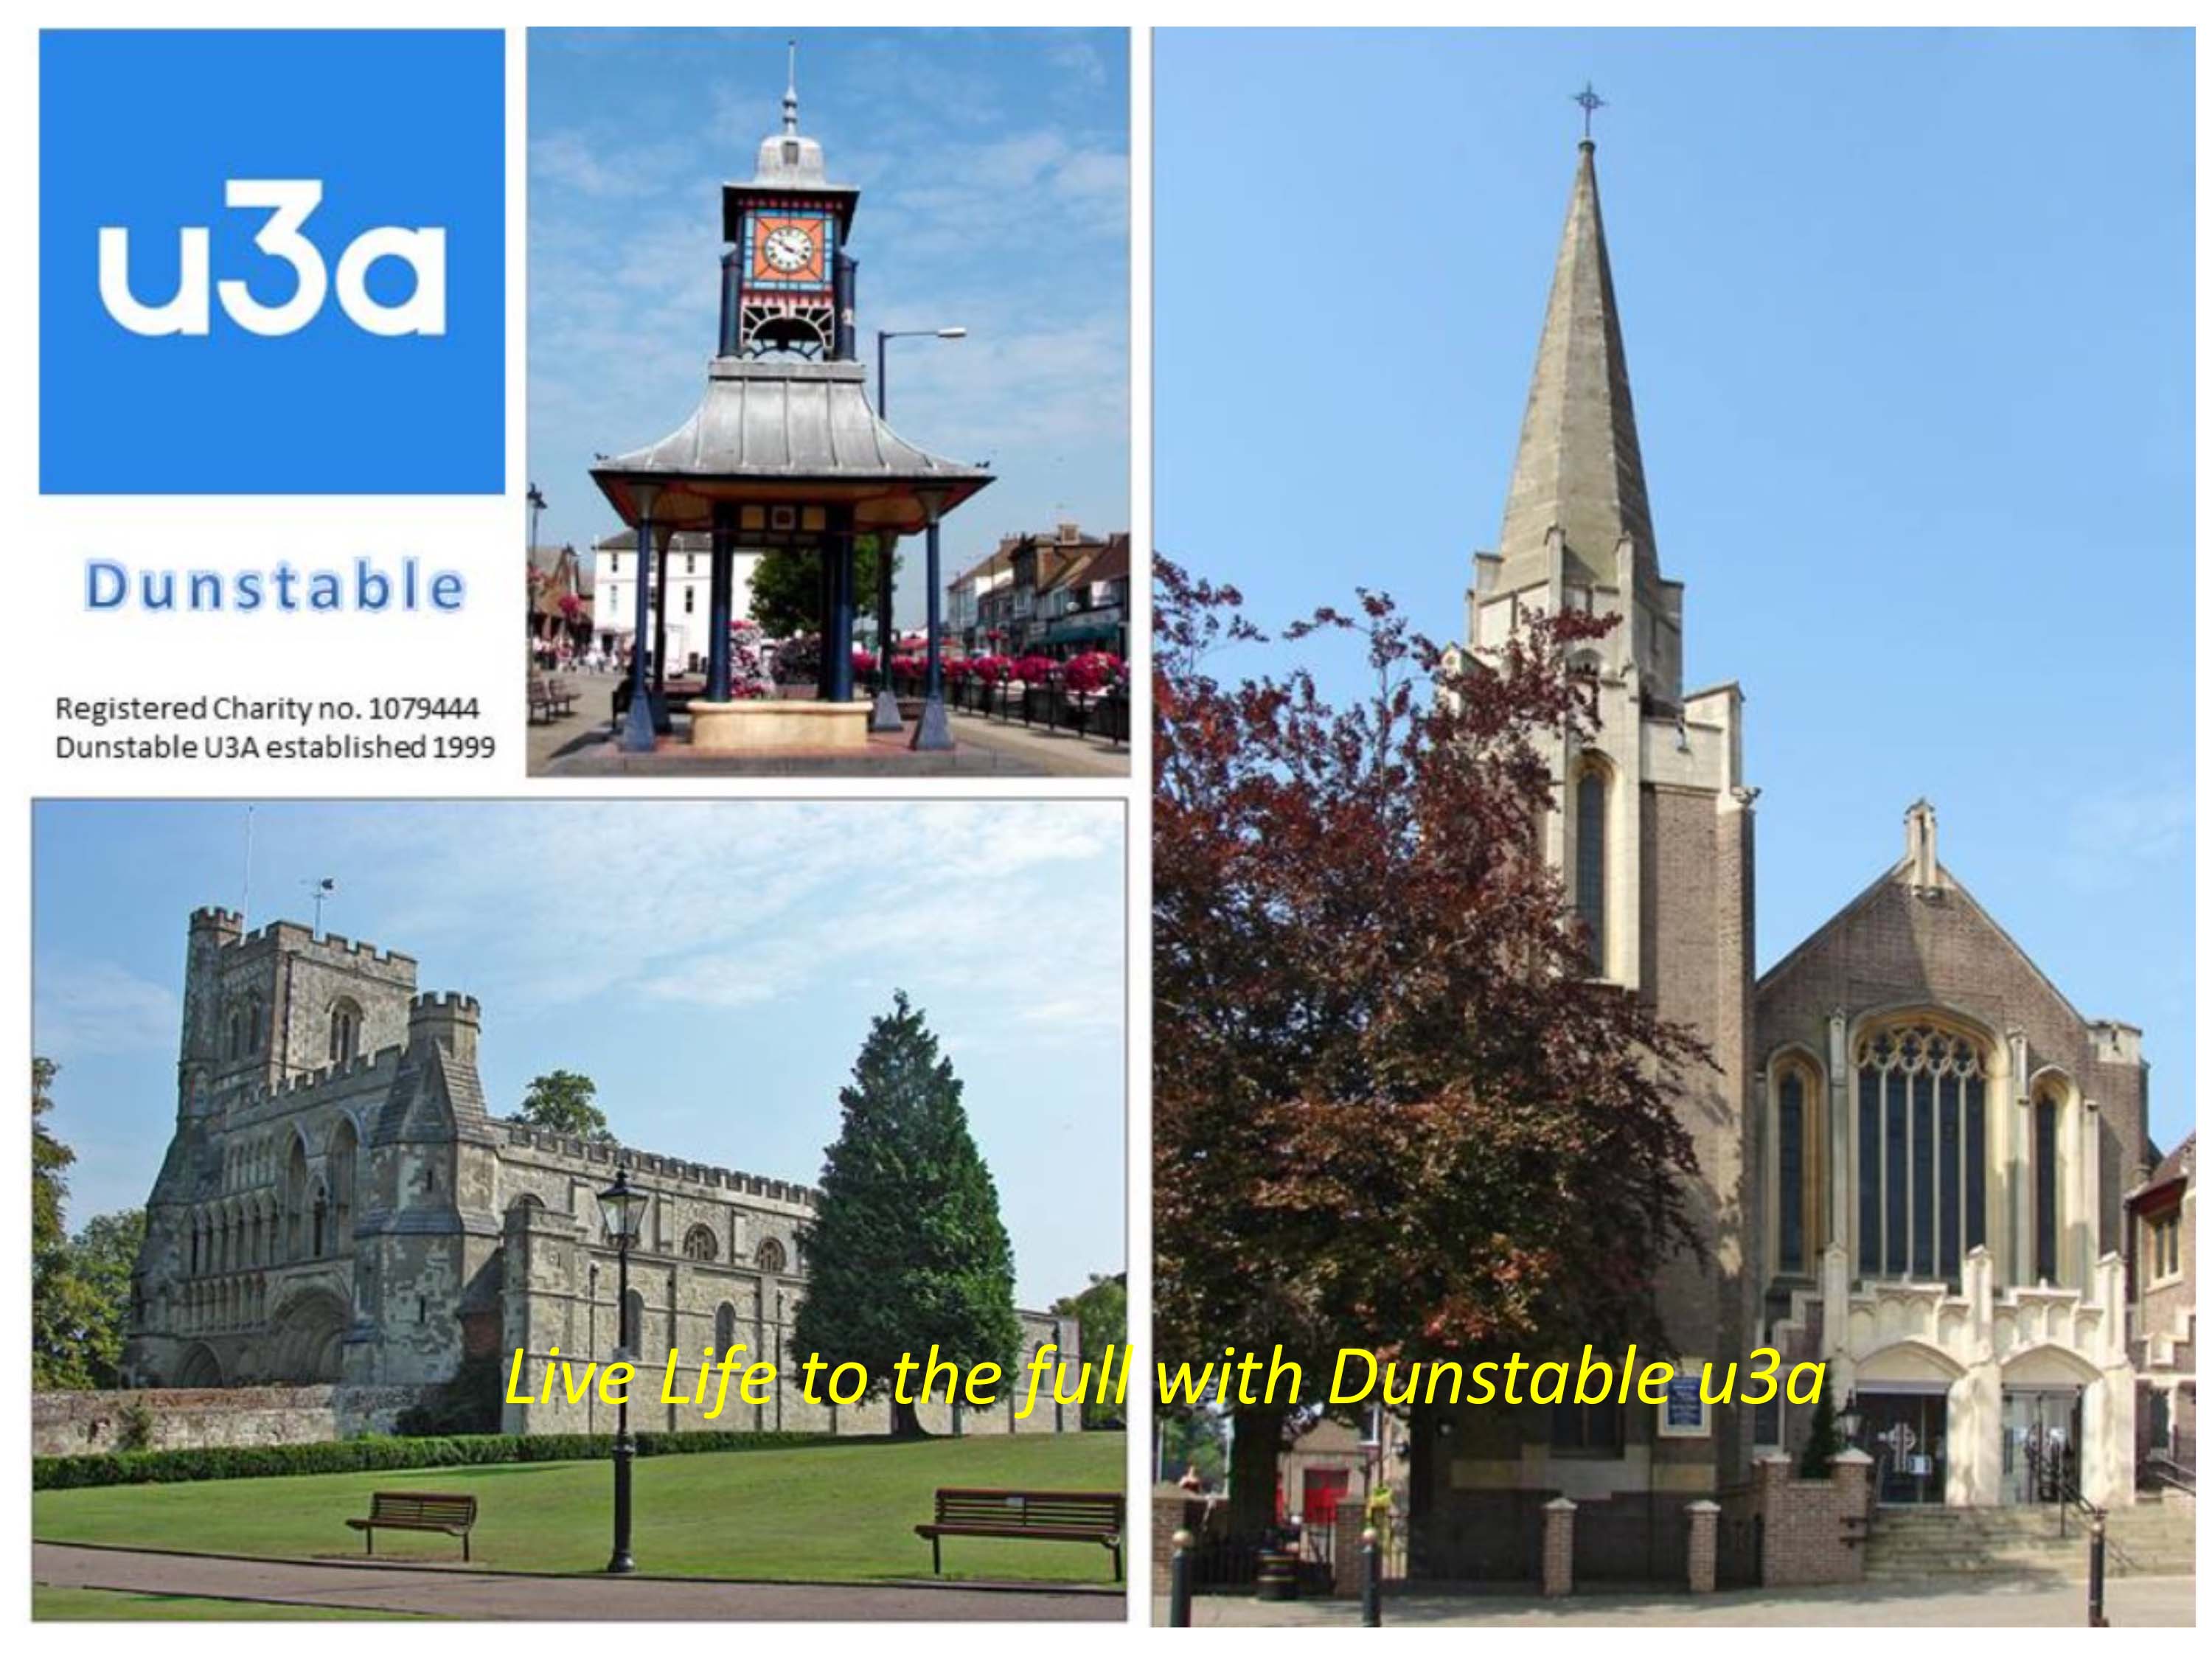 Live Life to the Full with Dunstable u3a